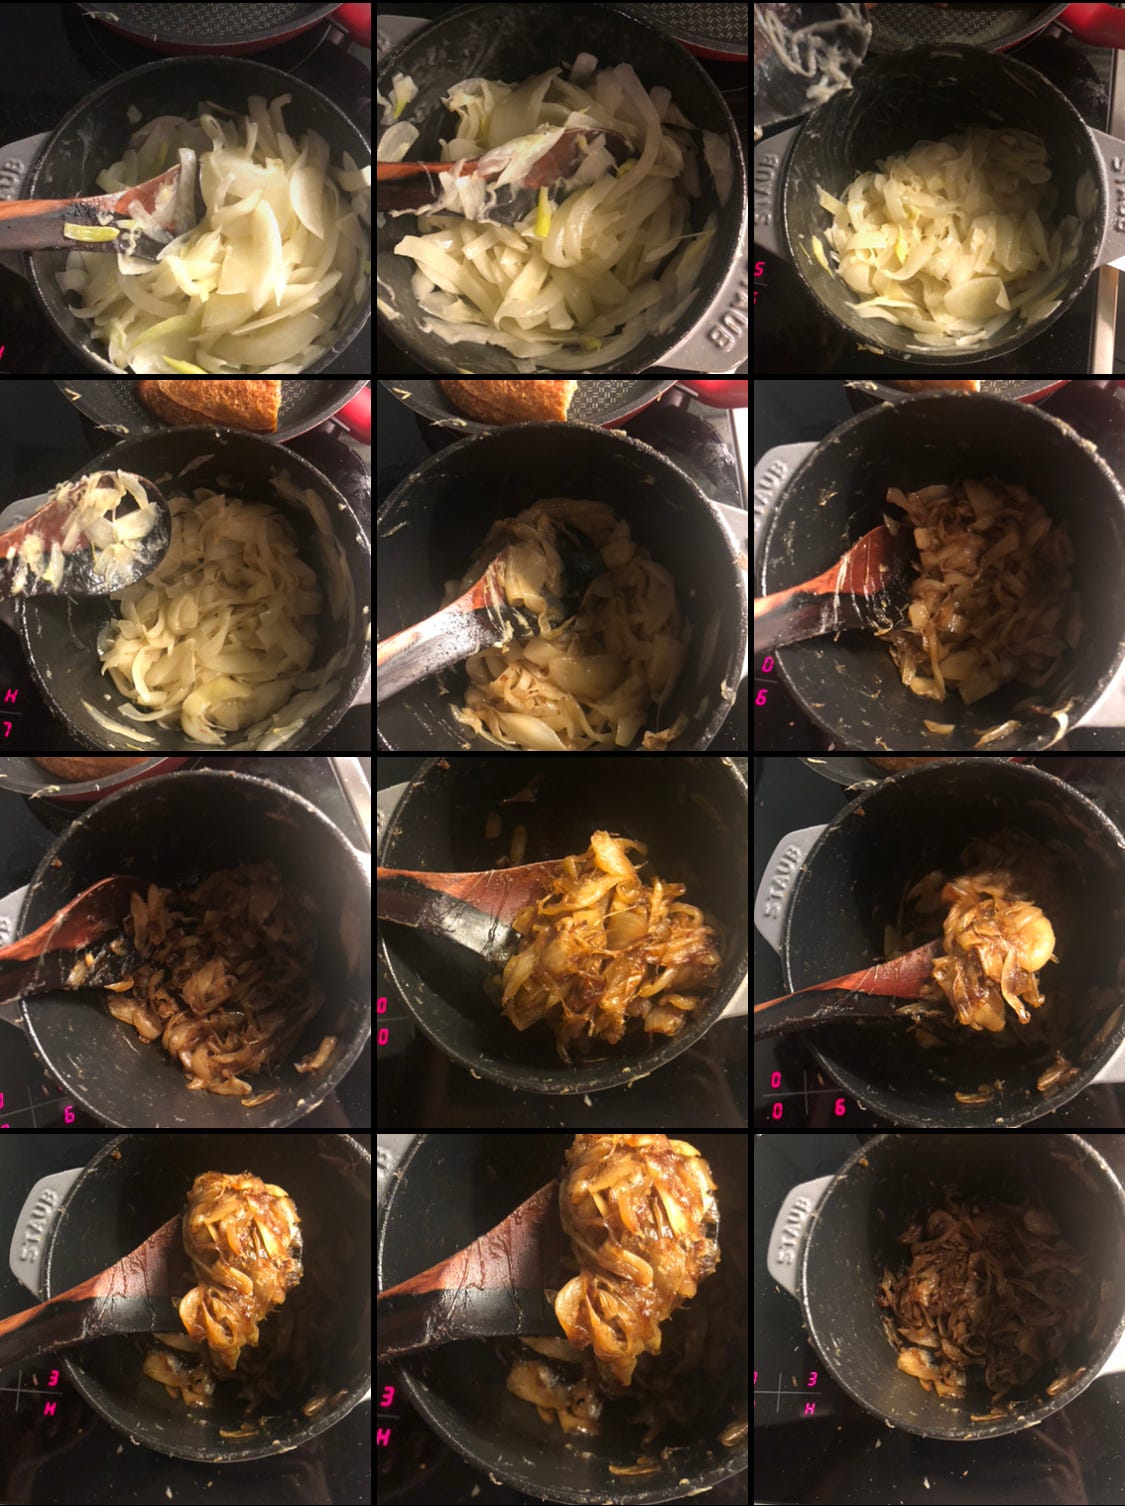 Screencap of phone photos gallery showing the progress of caramelized onions over the course of an hour.